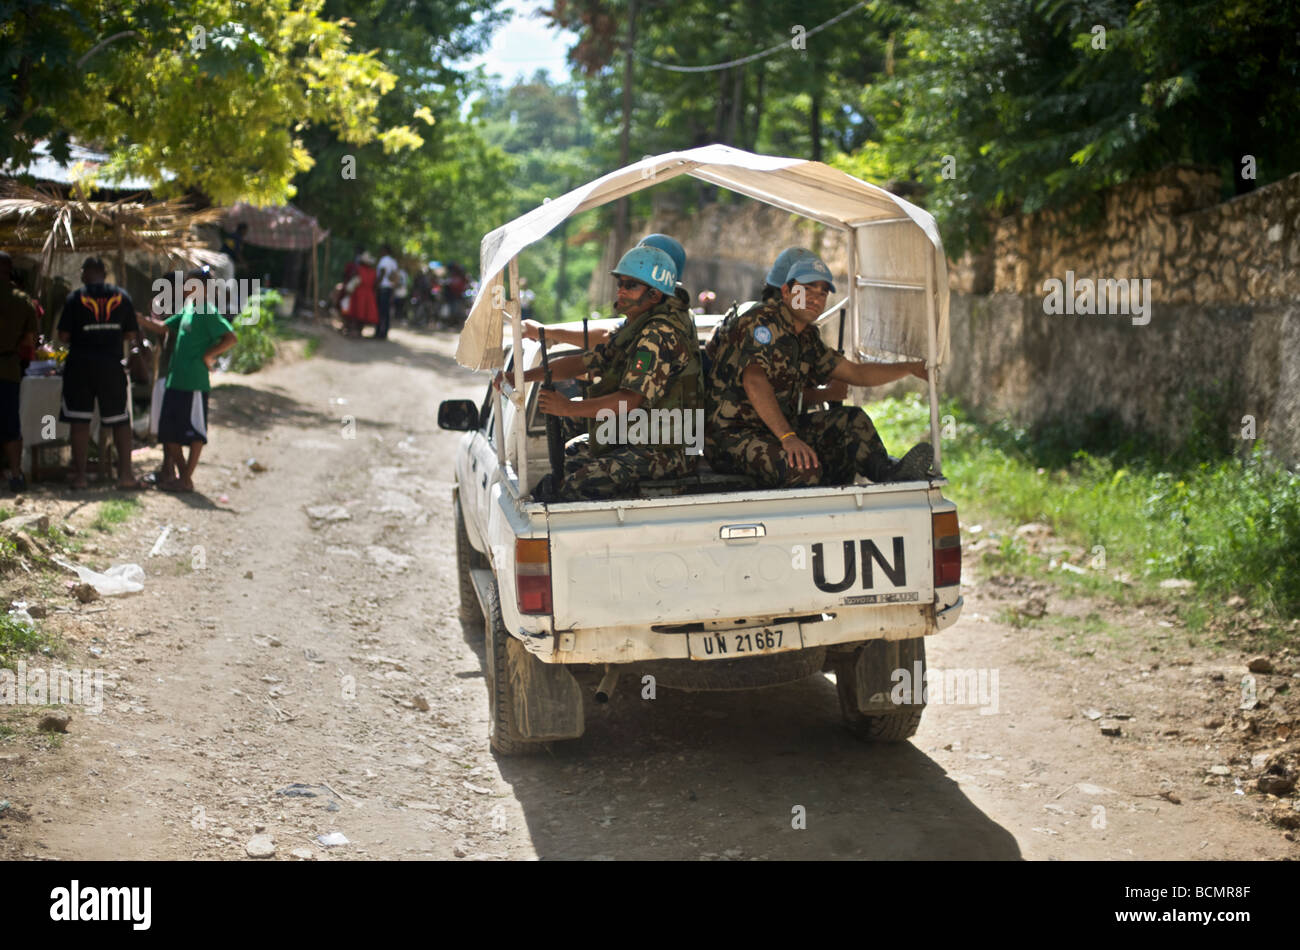 UN soldiers ride through the small village of Saut D'eau during the annual voodoo pilgrimage there on July 14, 2008. Stock Photo